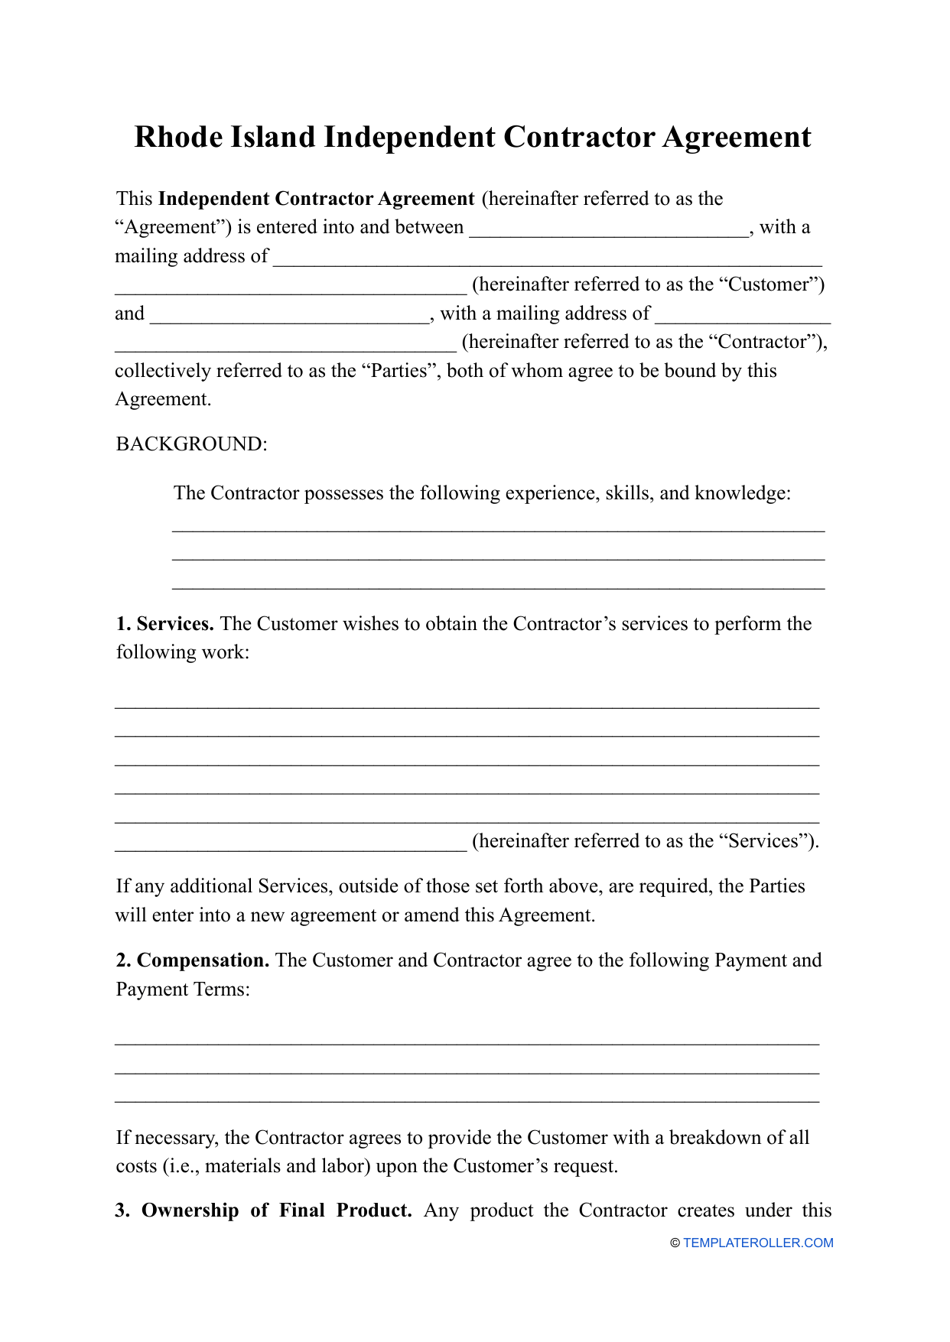 Independent Contractor Agreement Template - Rhode Island, Page 1